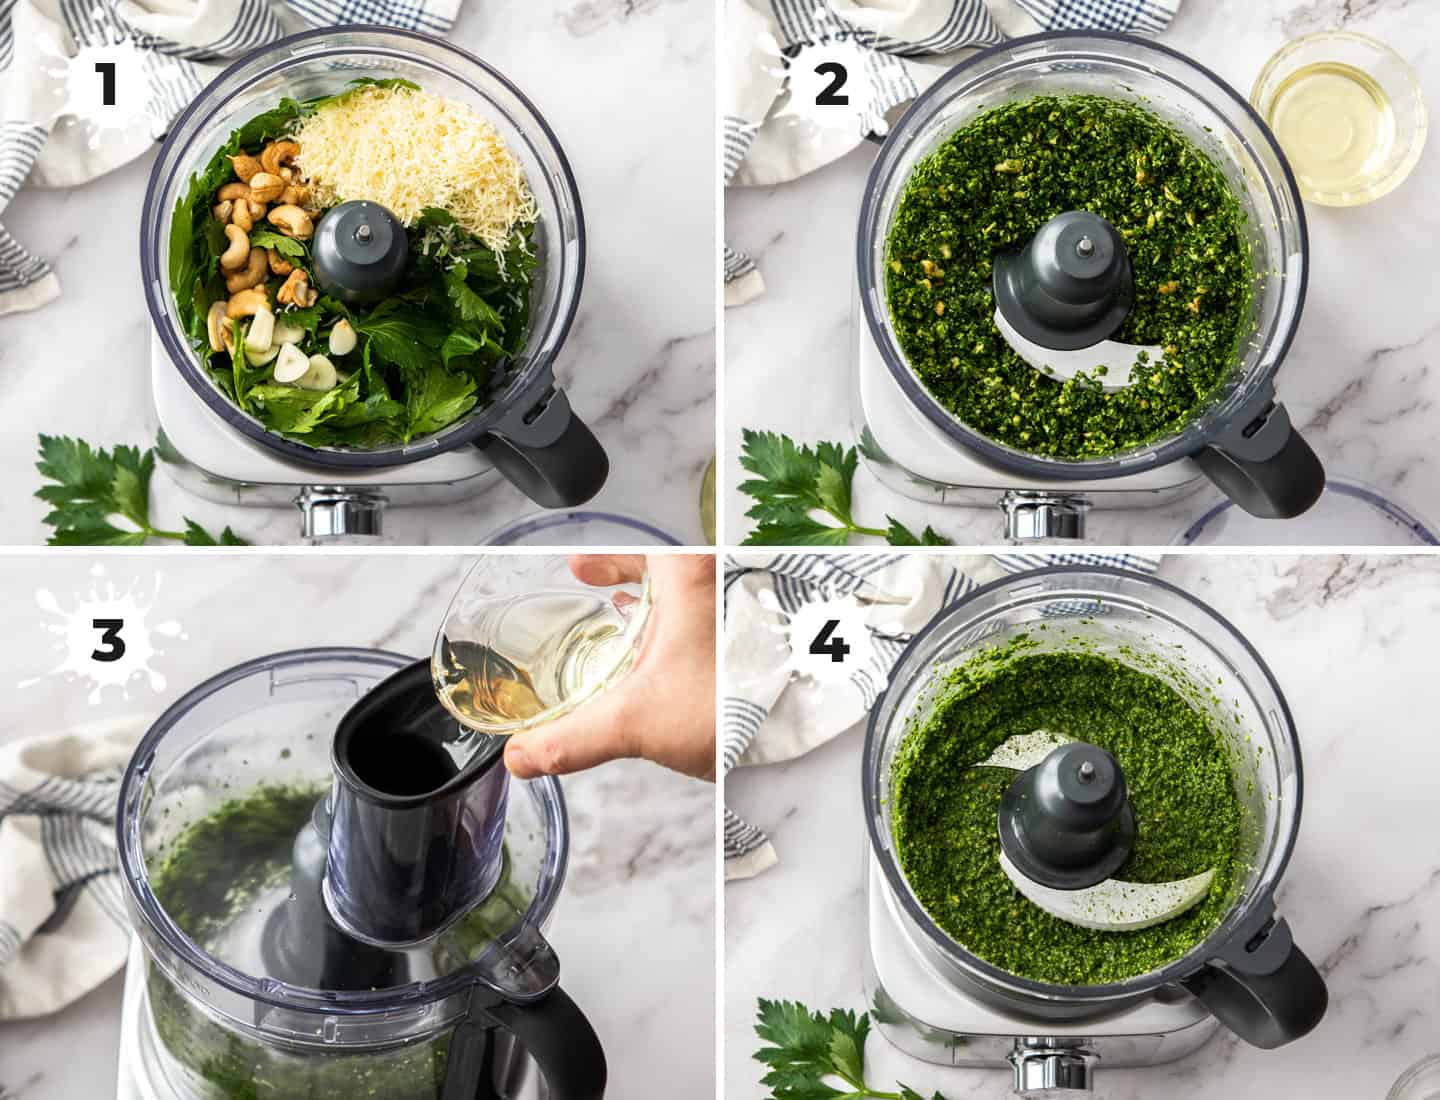 A collage of 4 images showing the stages of making celery leaf pesto.